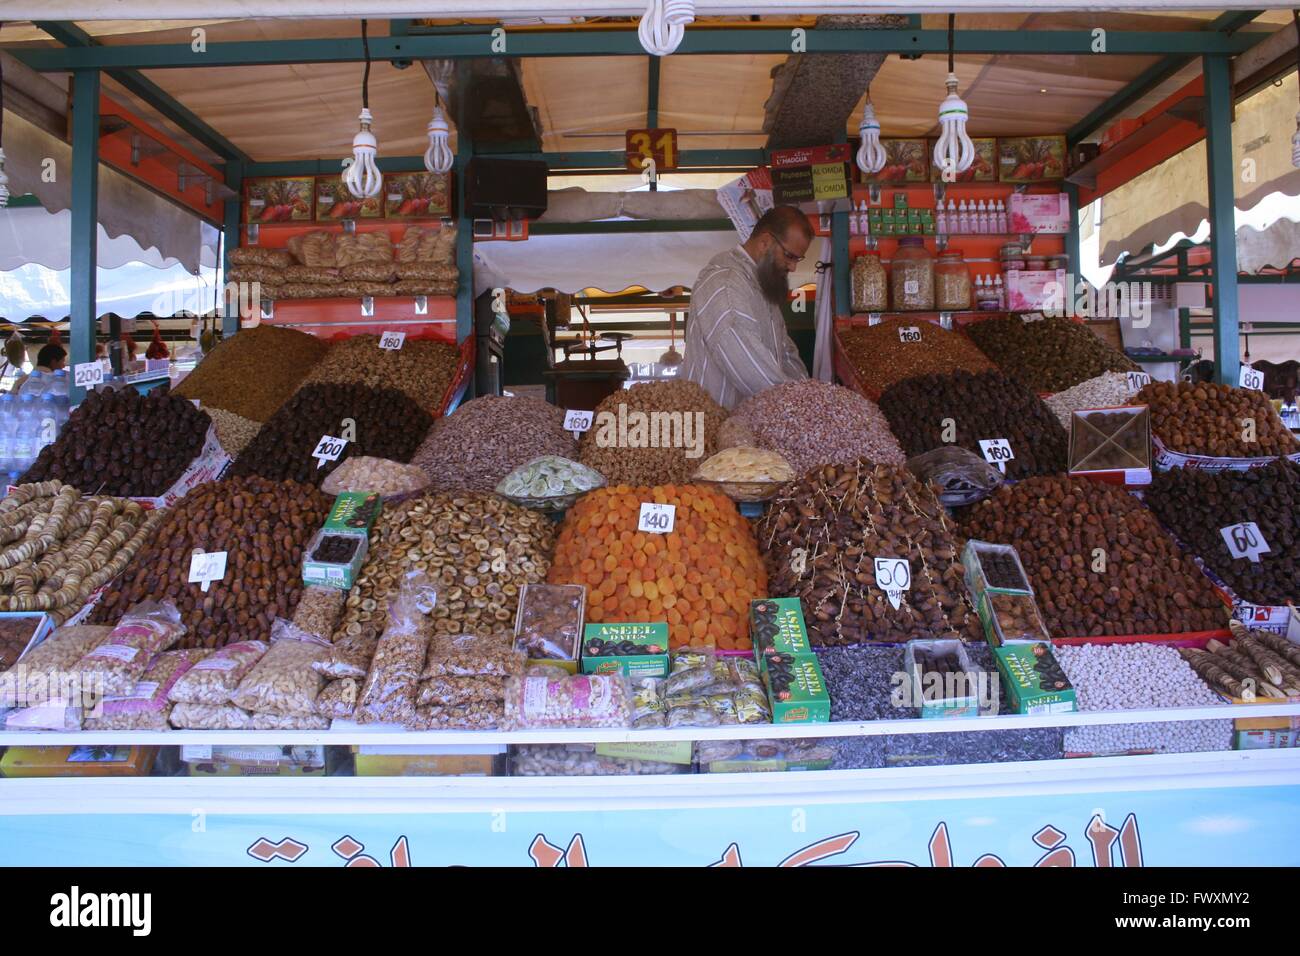 Date vendor's booth in Marrakech market Stock Photo